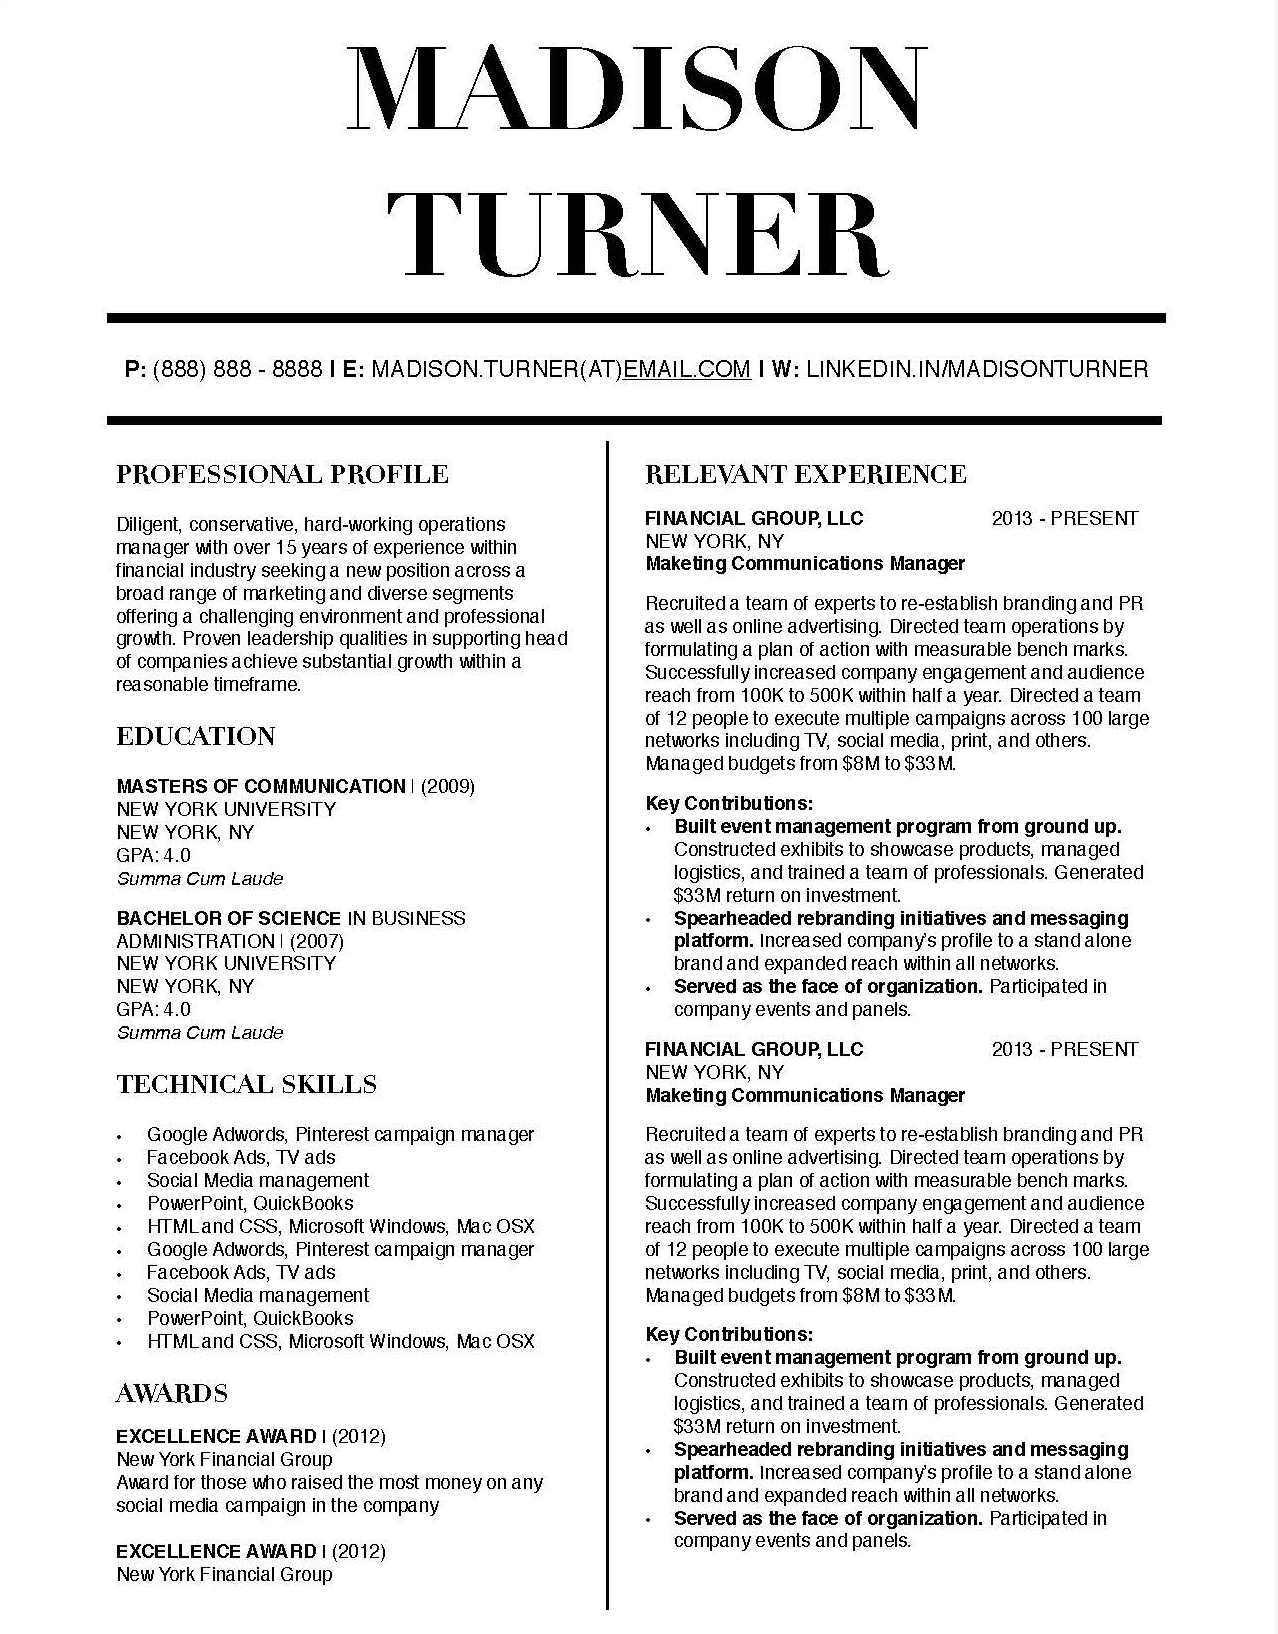 Madison Turner - Downloadable Resume Template and Cover Letter Template for Microsoft Word and Apple Pages